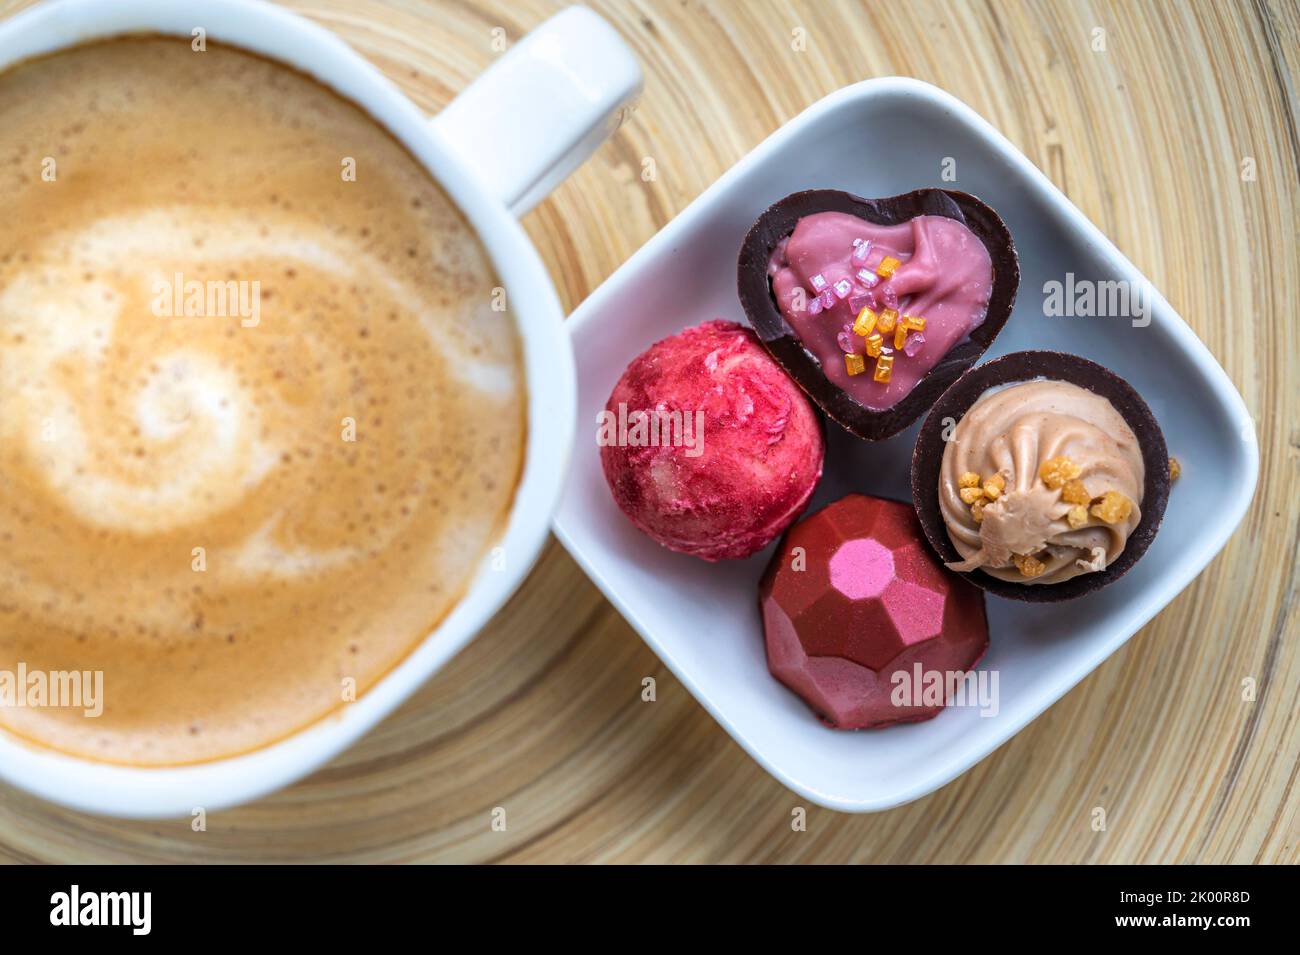 Delicious coffee with homemade chocolates as an enjoyable snack Stock Photo